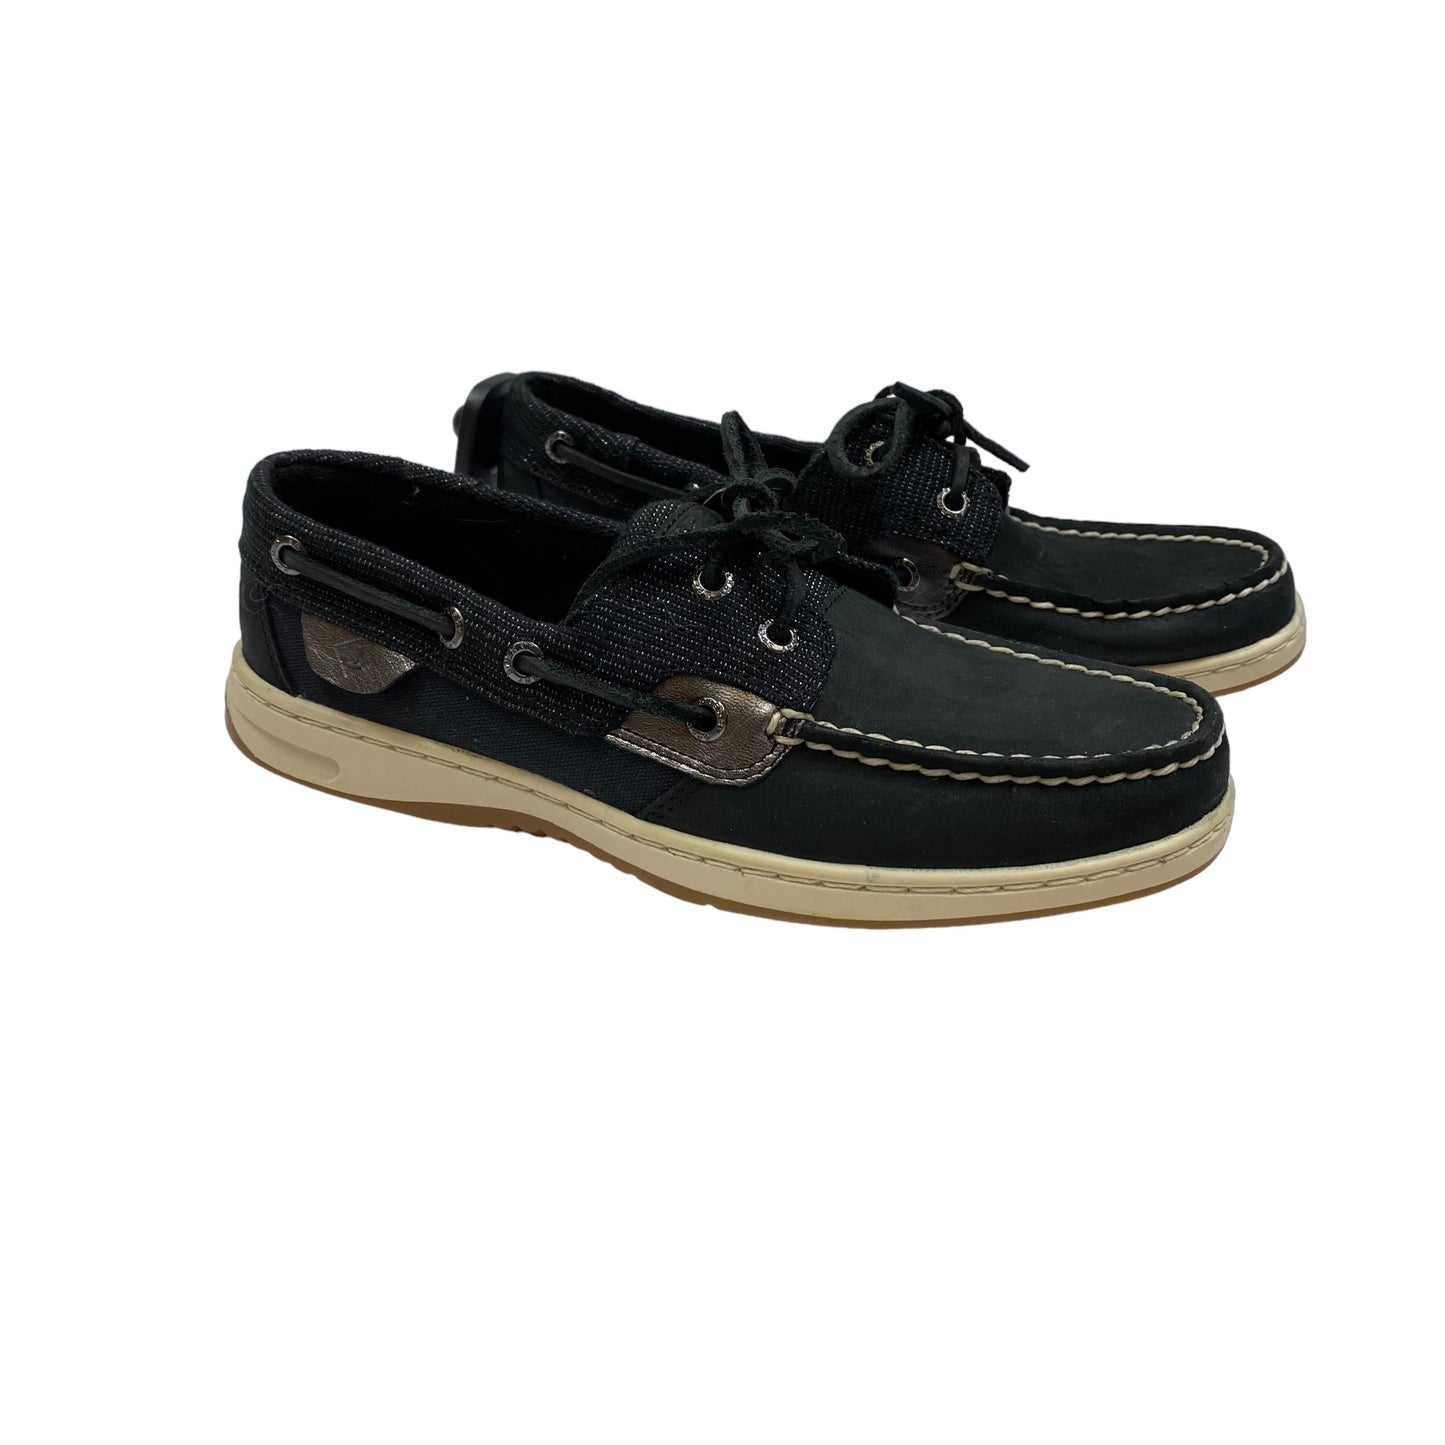 Black Shoes Flats Sperry, Size 6.5